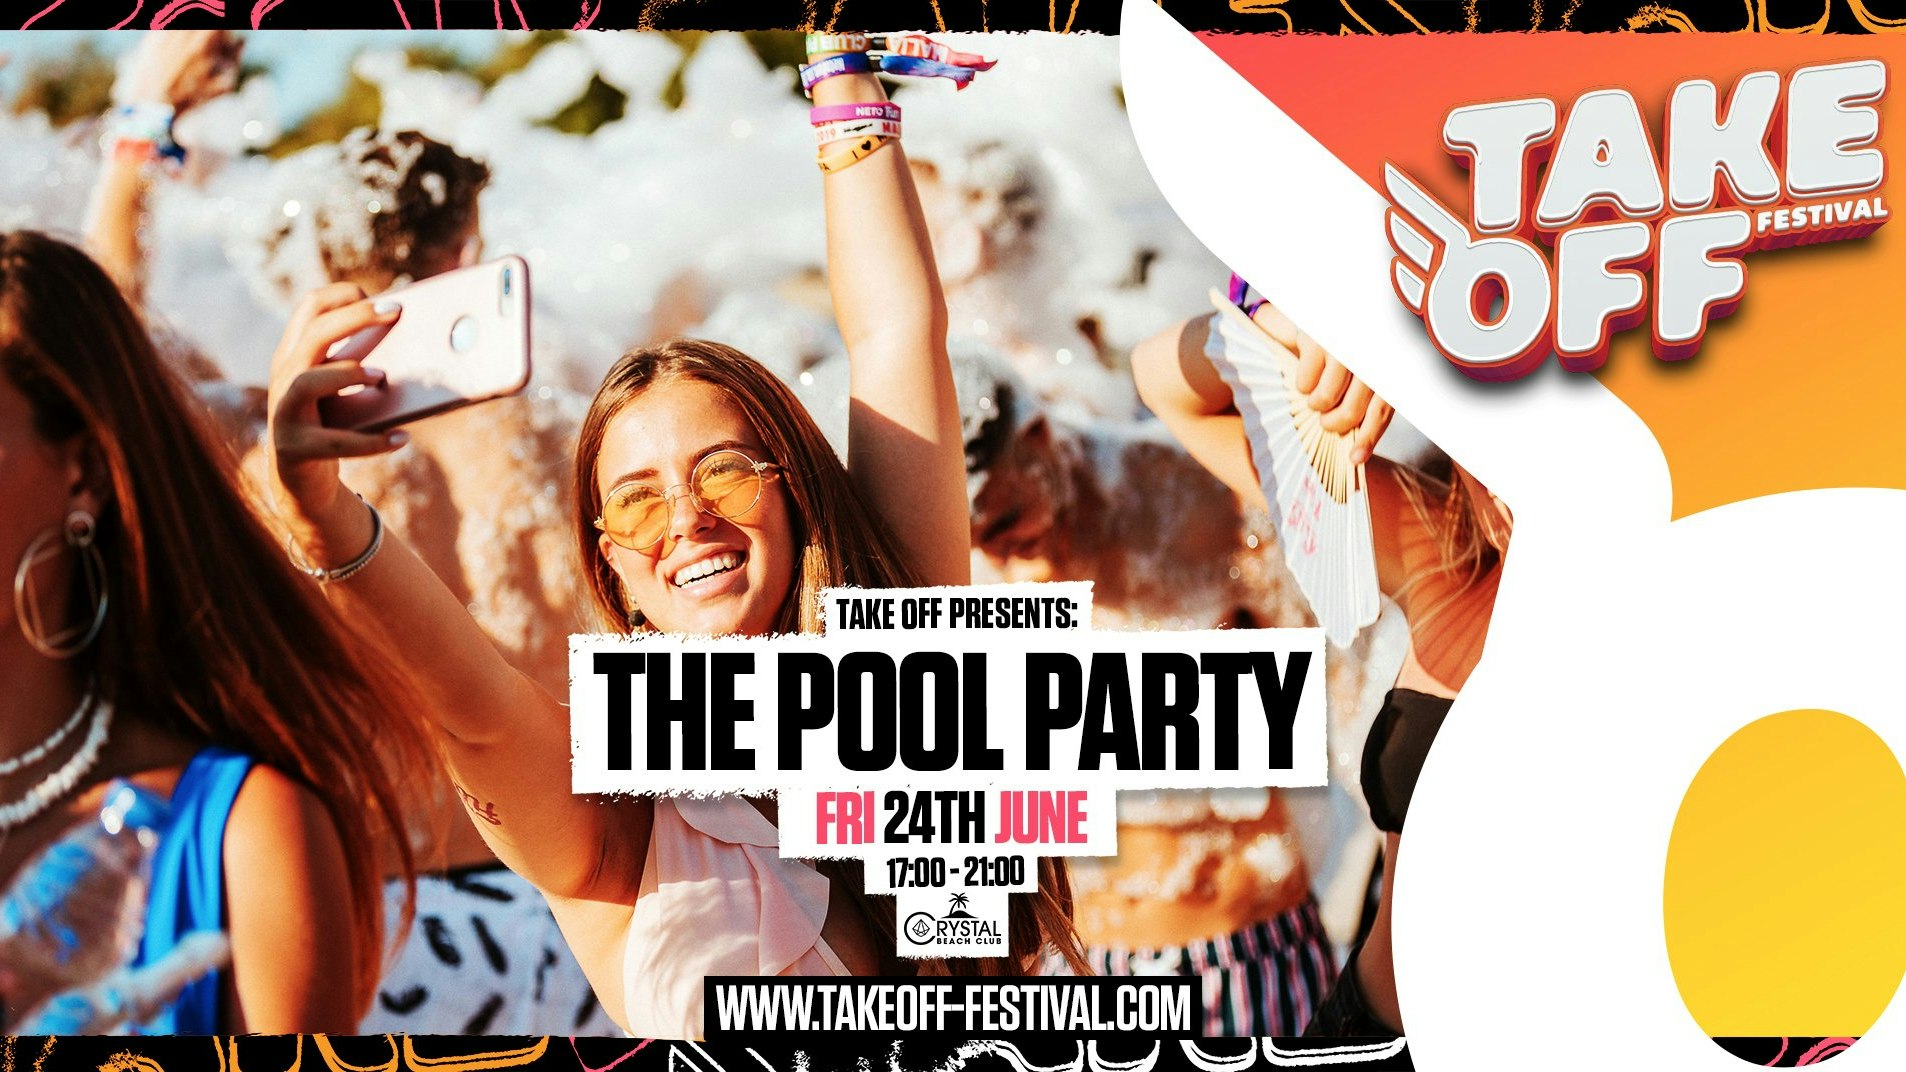 Take Off Presents: THE POOL PARTY at Crystal Beach